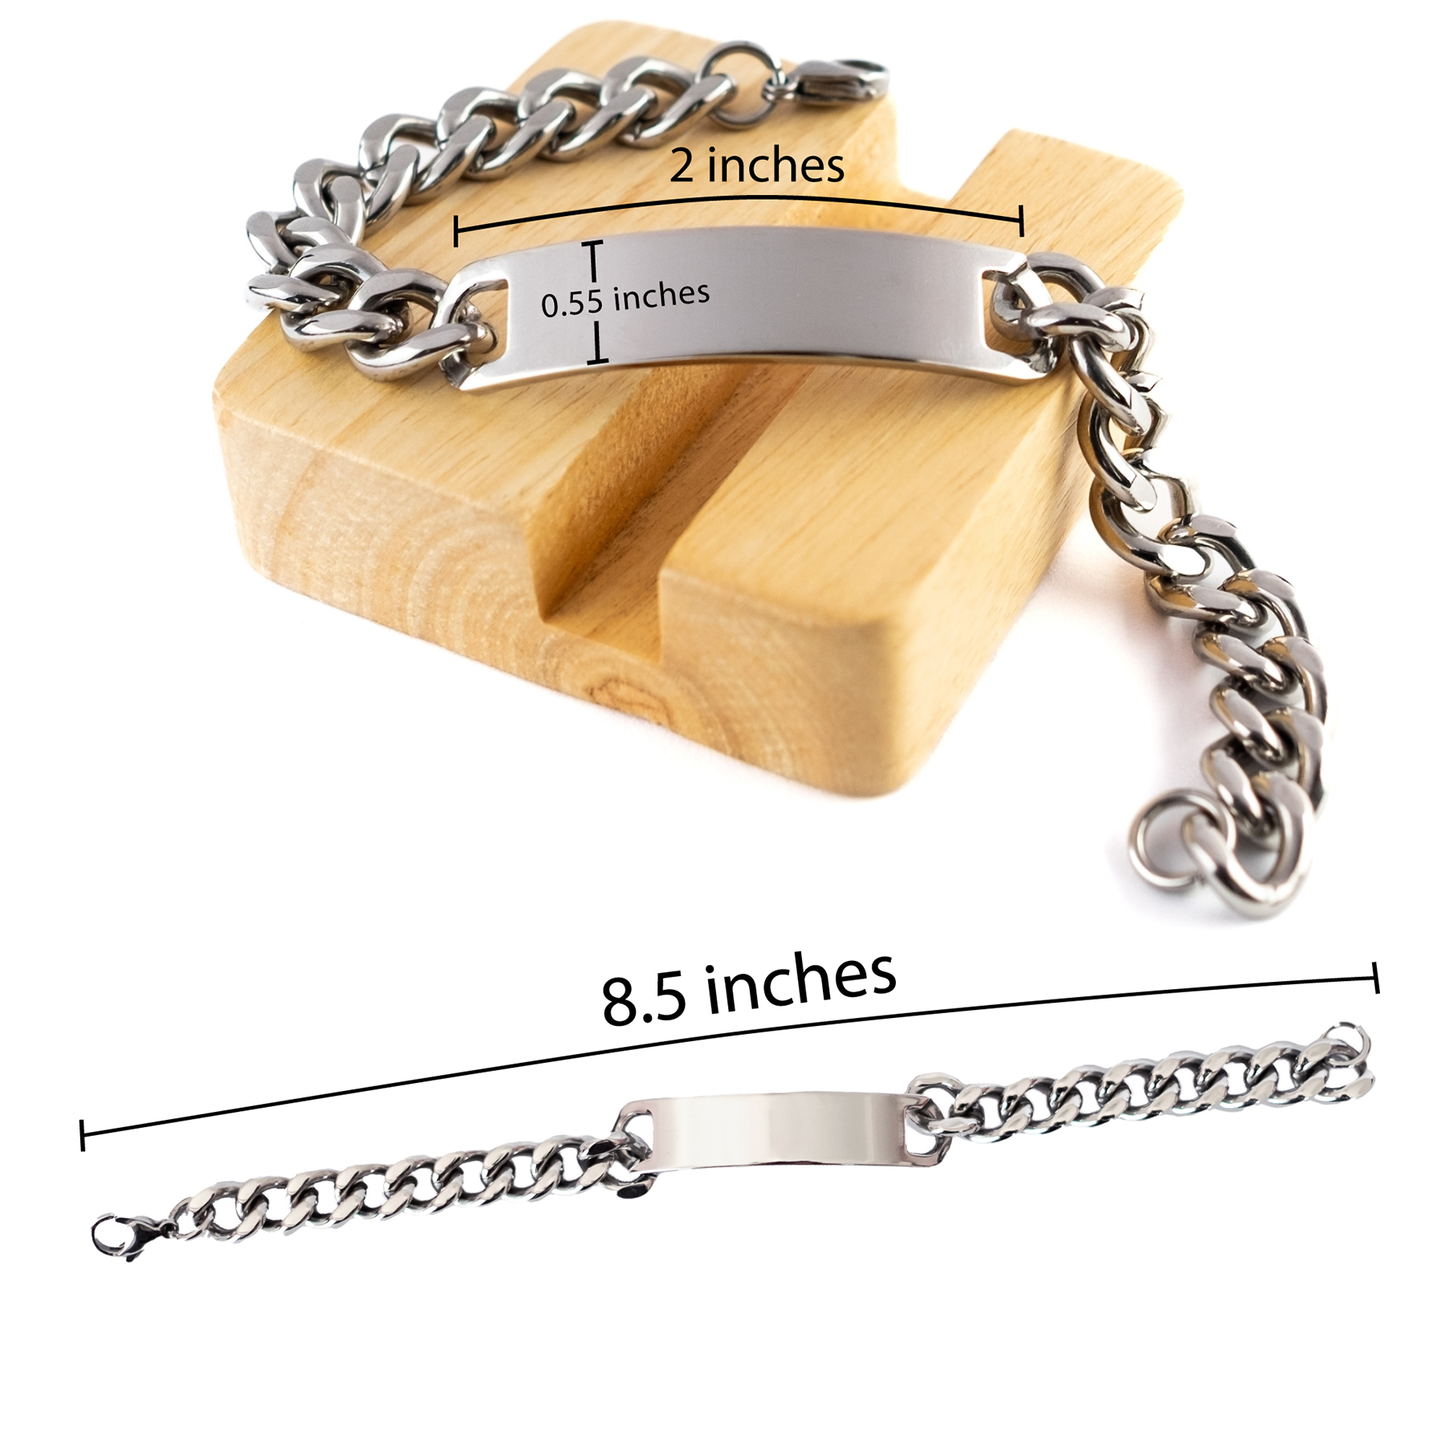 Gifts for Telemarketer, In a world where you can be anything, Appreciation Birthday Cuban Chain Stainless Steel Bracelet for Men, Women, Friends, Coworkers